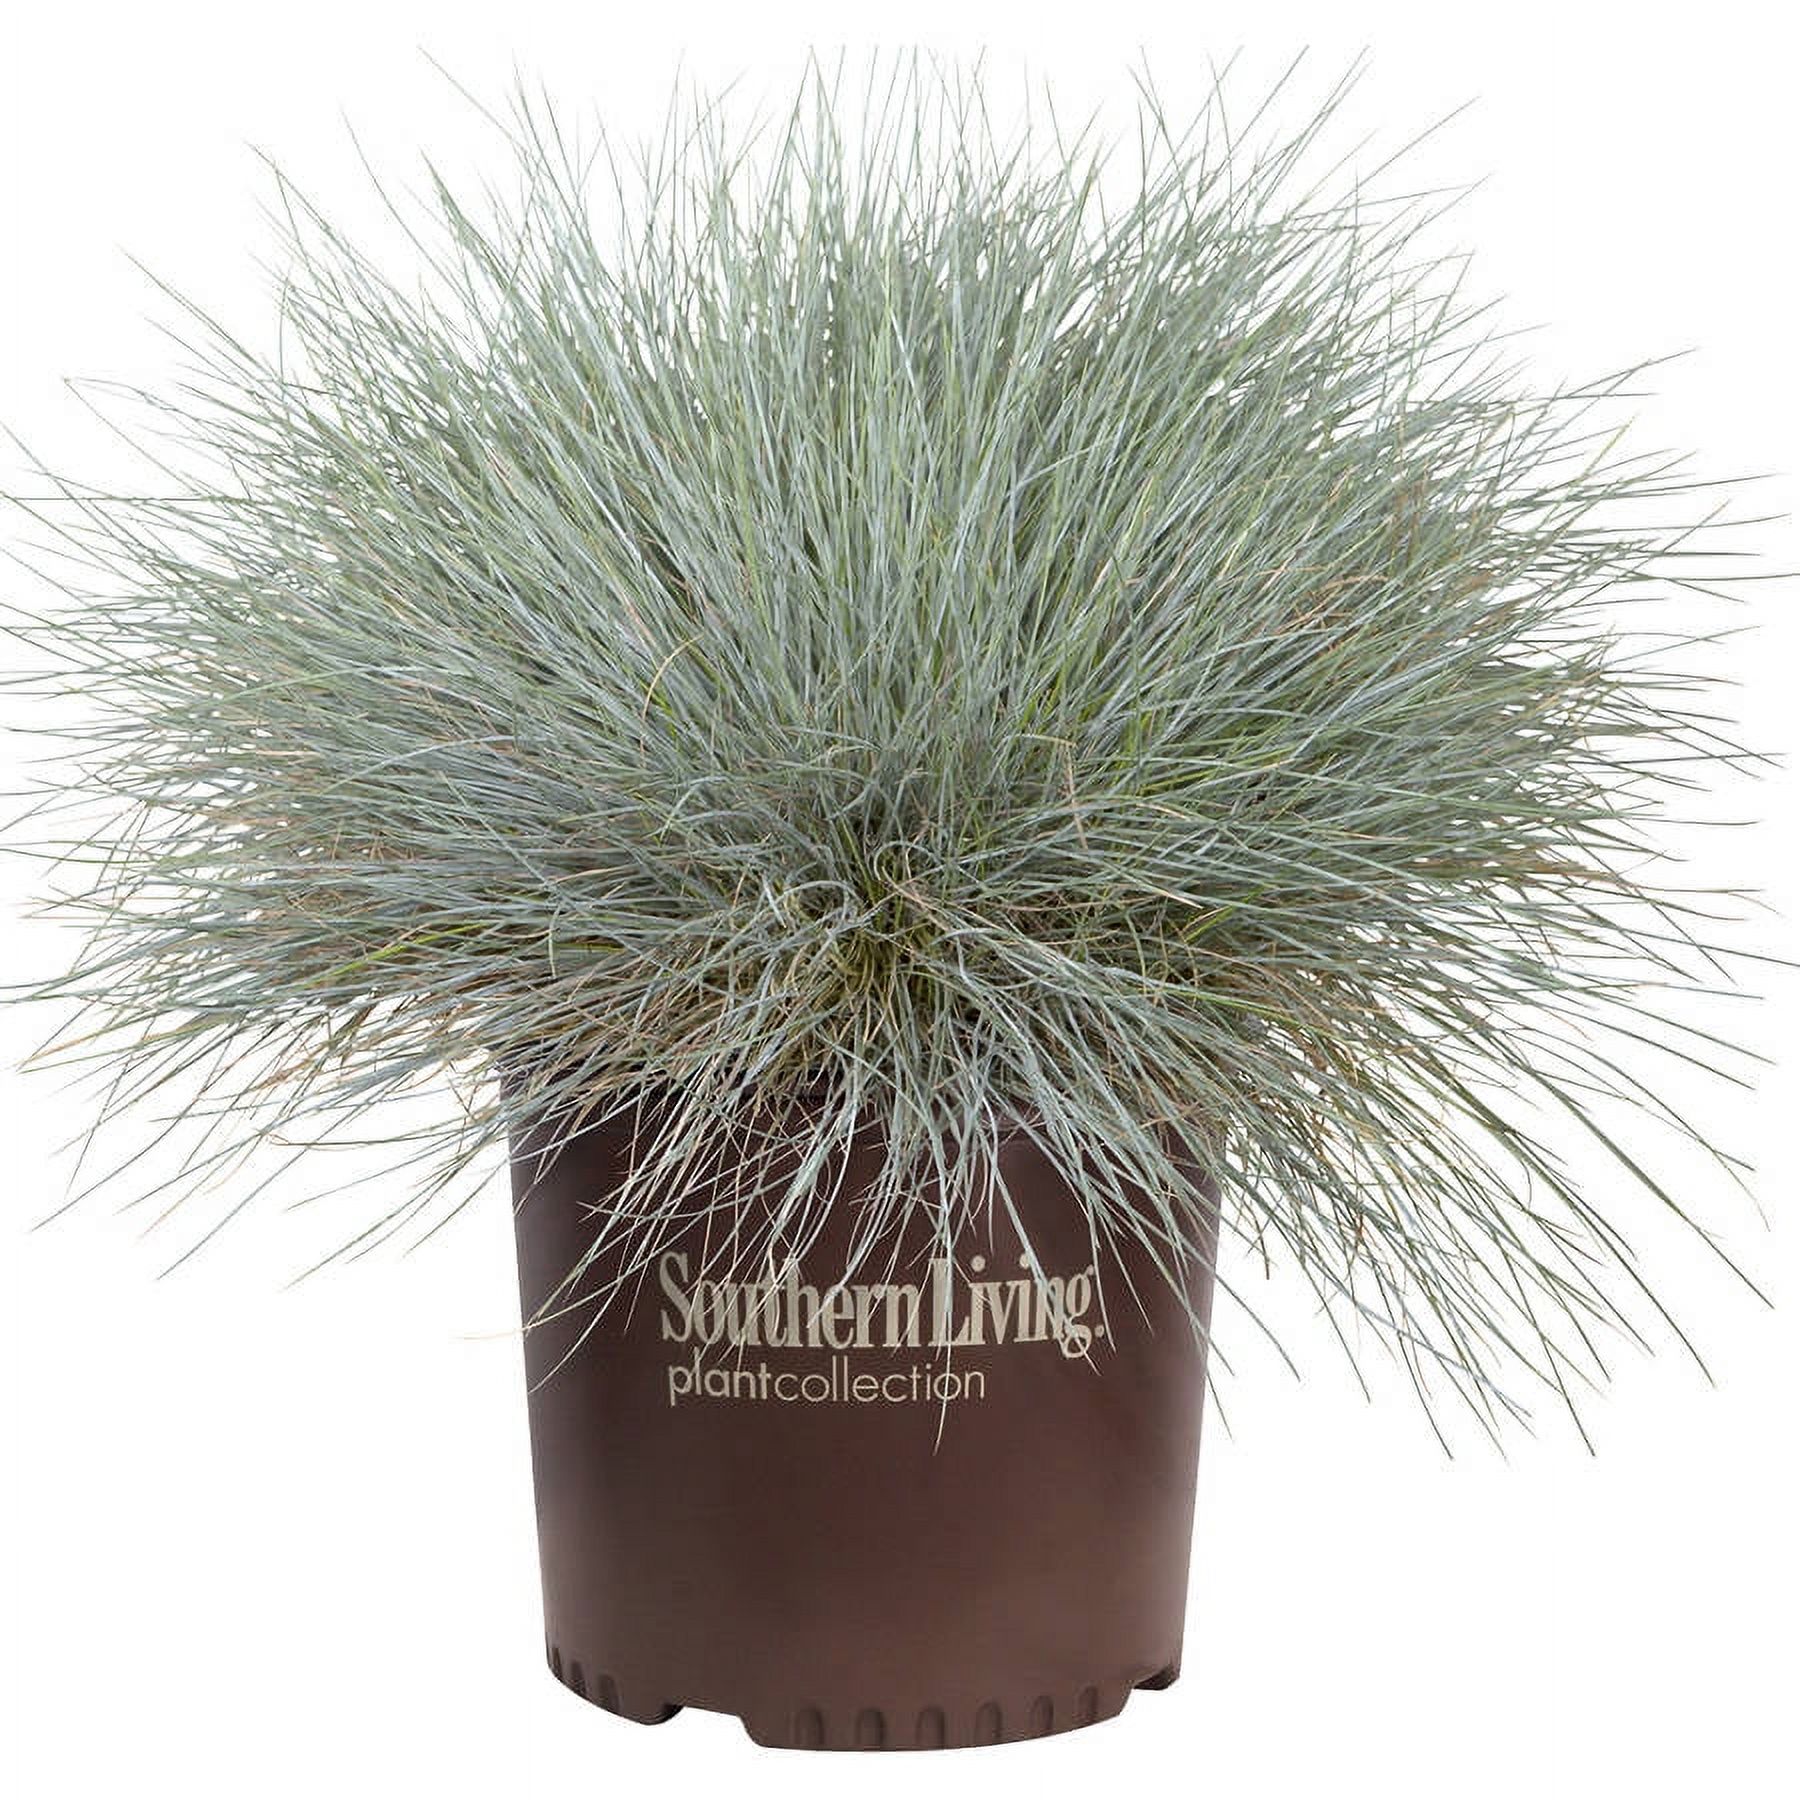 Beyond Blue Festuca (2.5 Quart) Ornamental Perennial Fescue Grass with Powder Blue Foliage - Full Sun Live Outdoor Plant - Southern Living Plant Collection - image 3 of 5